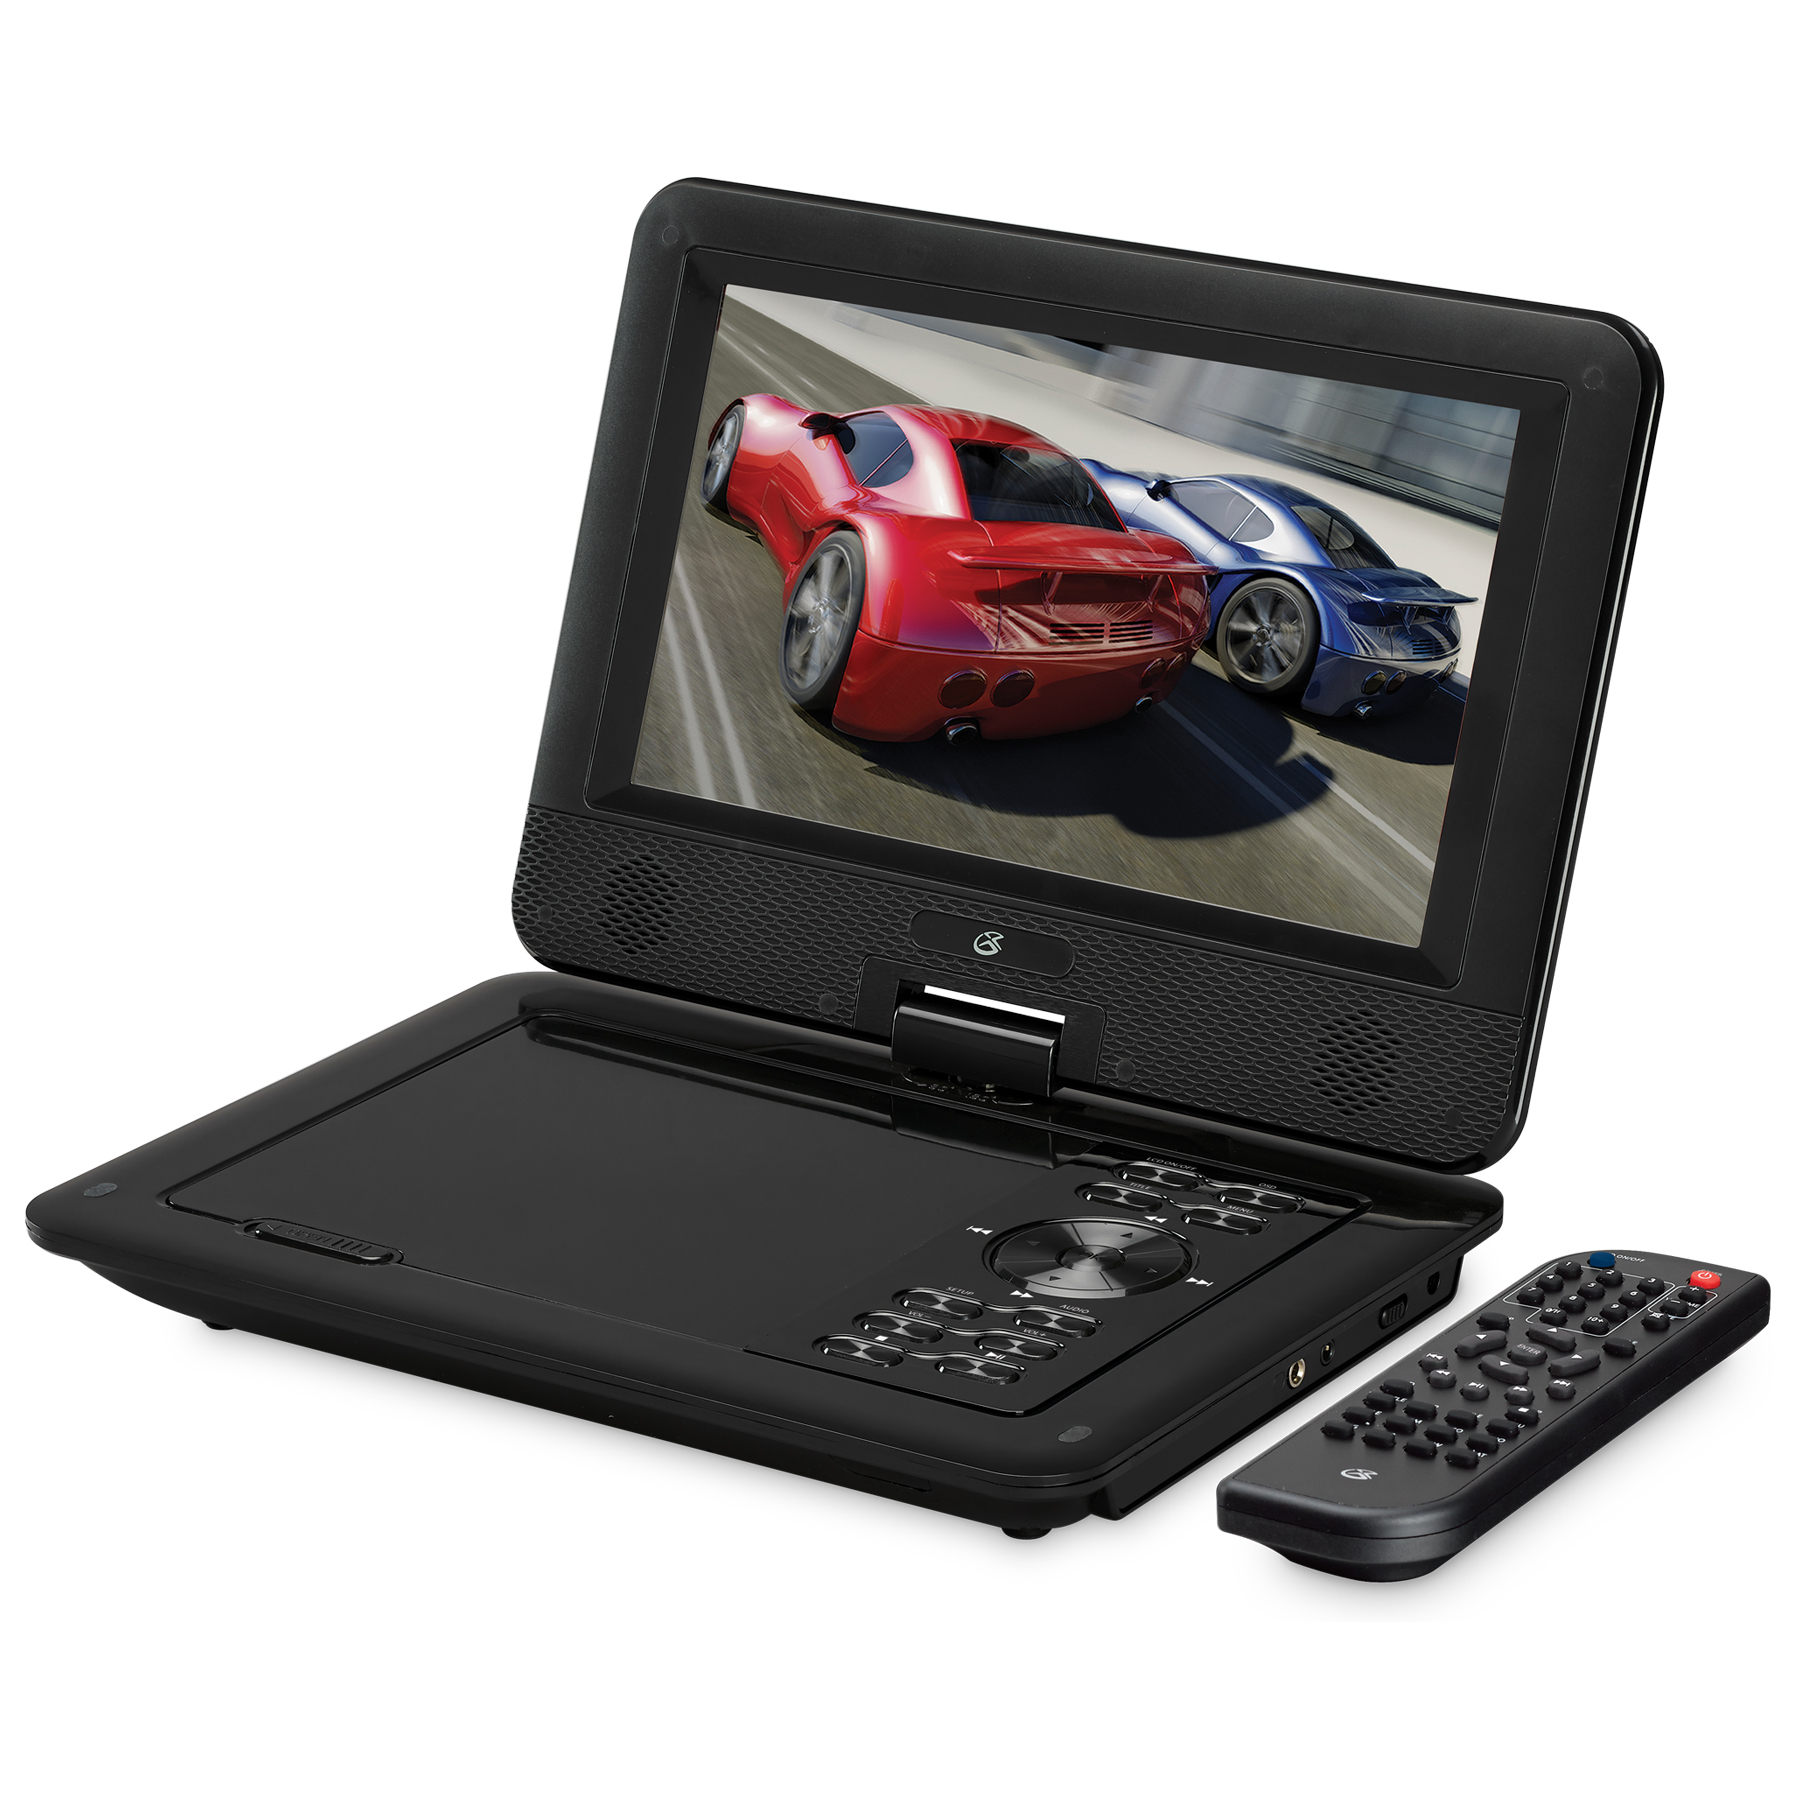 GPX 9 inch LCD Swivel Screen DVD Player w/ Remote $38 + free s/h at Walmart